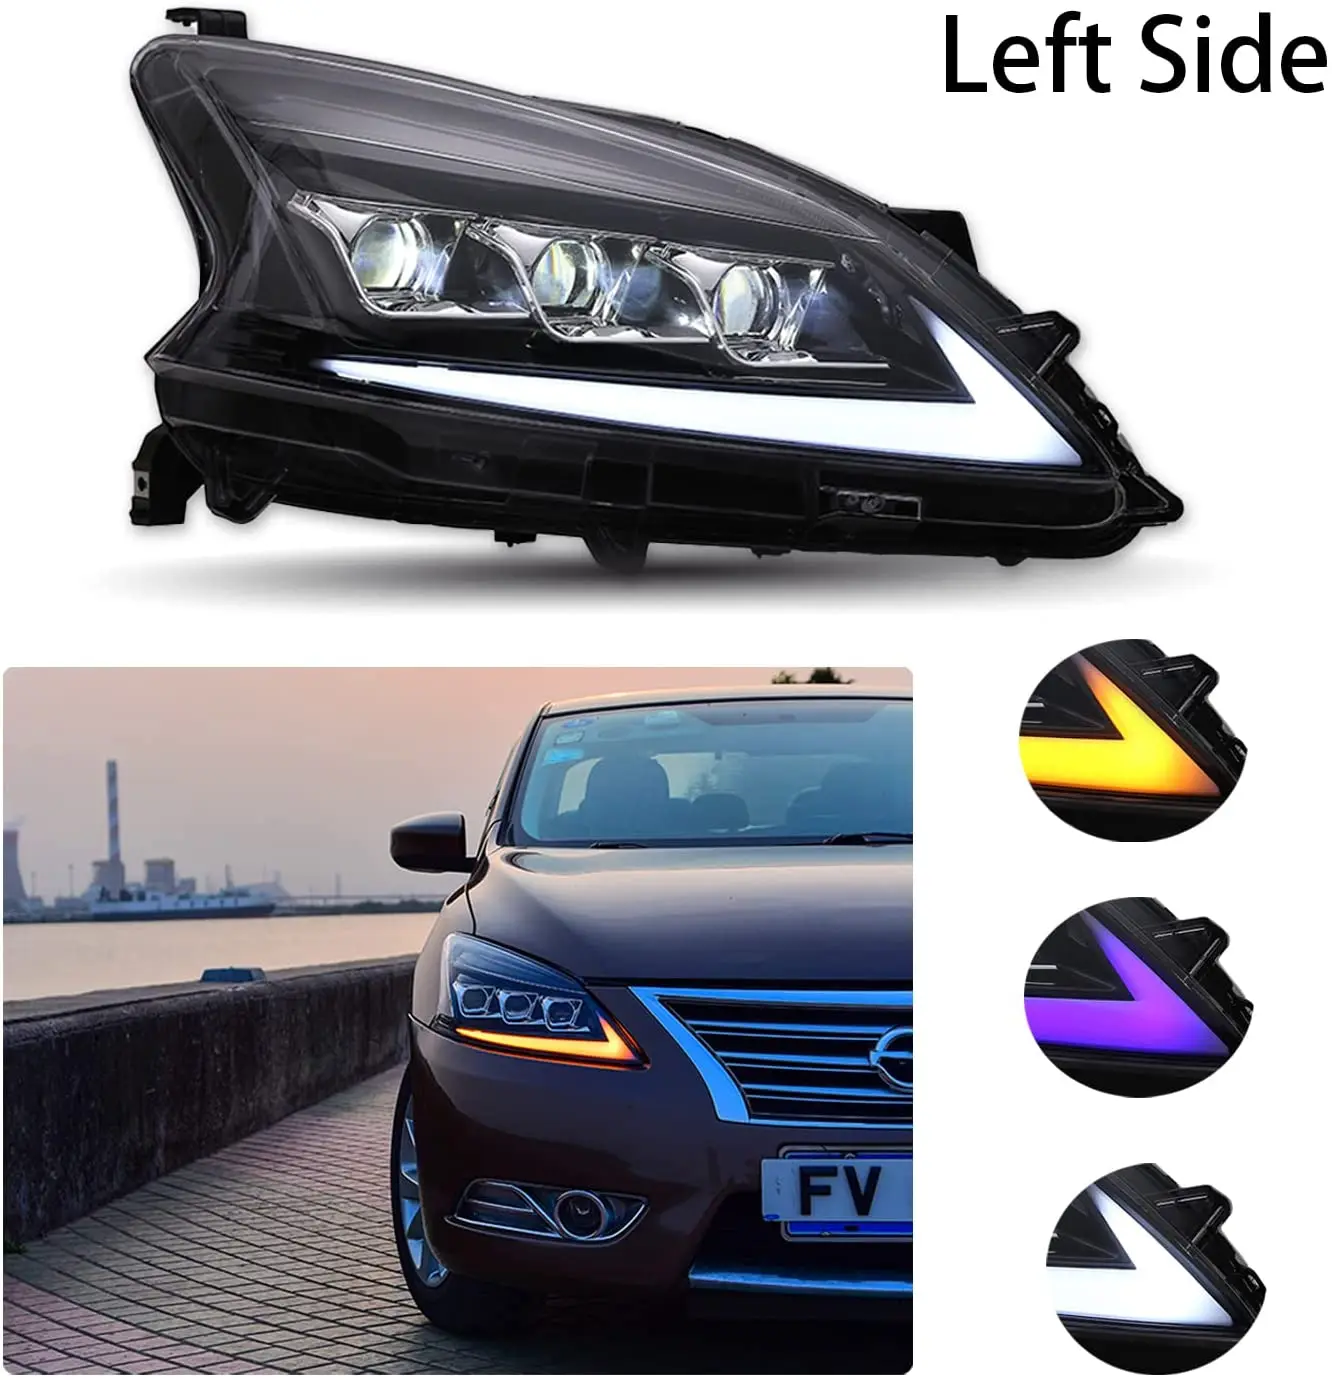 

LED Headlights For Nissan Sylphy/Sentra/Pulsar 2013 2014 2015 With The Start Up Animation Sequential Turn Signal Light Ass